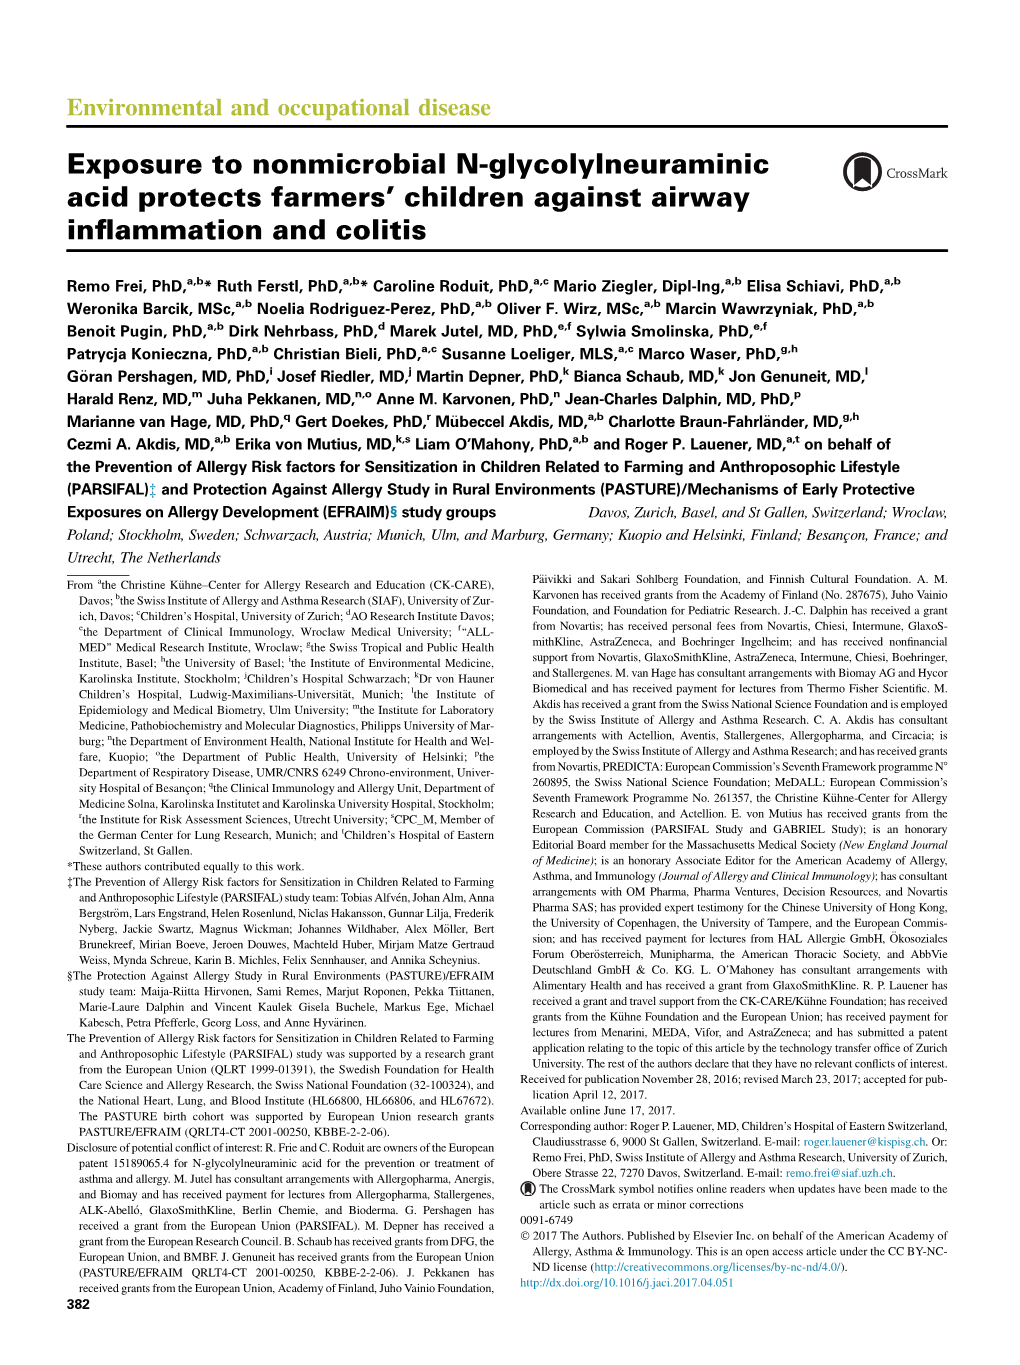 Exposure to Nonmicrobial N-Glycolylneuraminic Acid Protects Farmers’ Children Against Airway Inﬂammation and Colitis